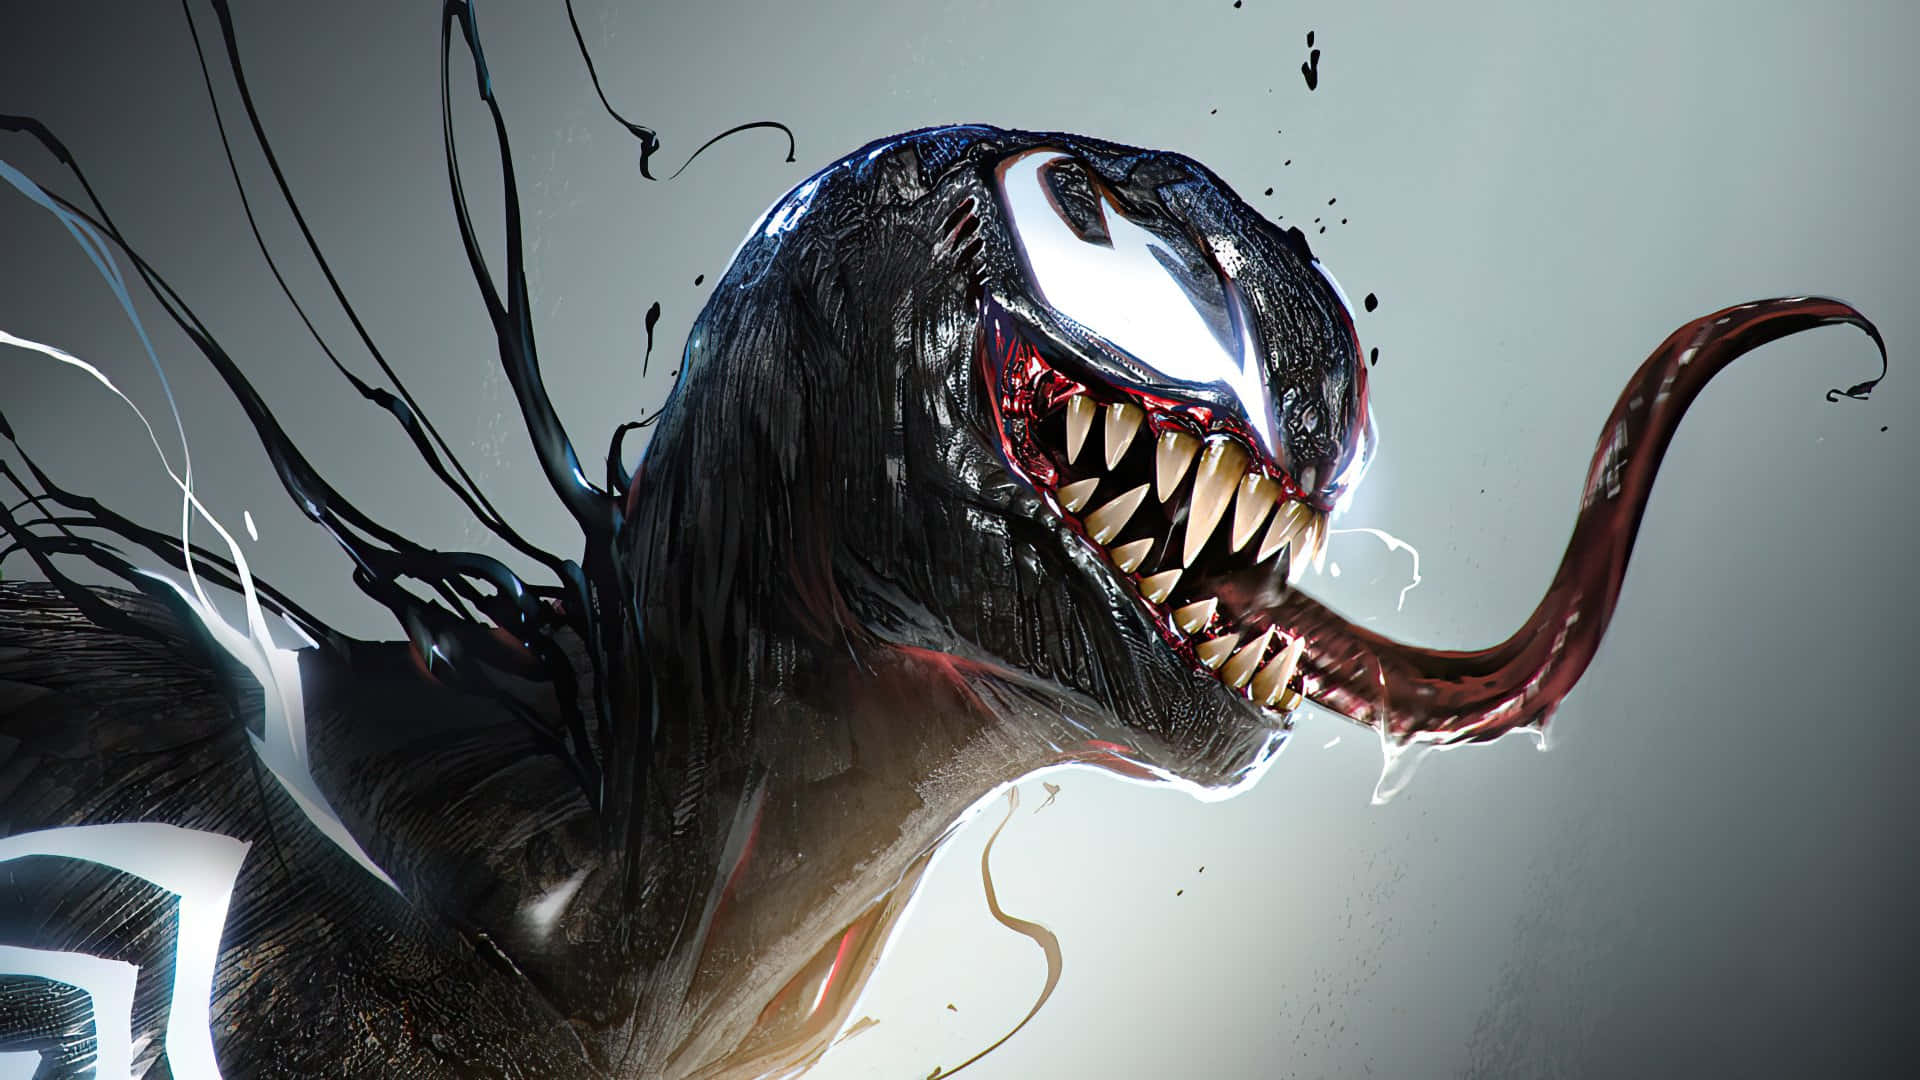 Marvel's iconic character, Venom, with a menacing stare.